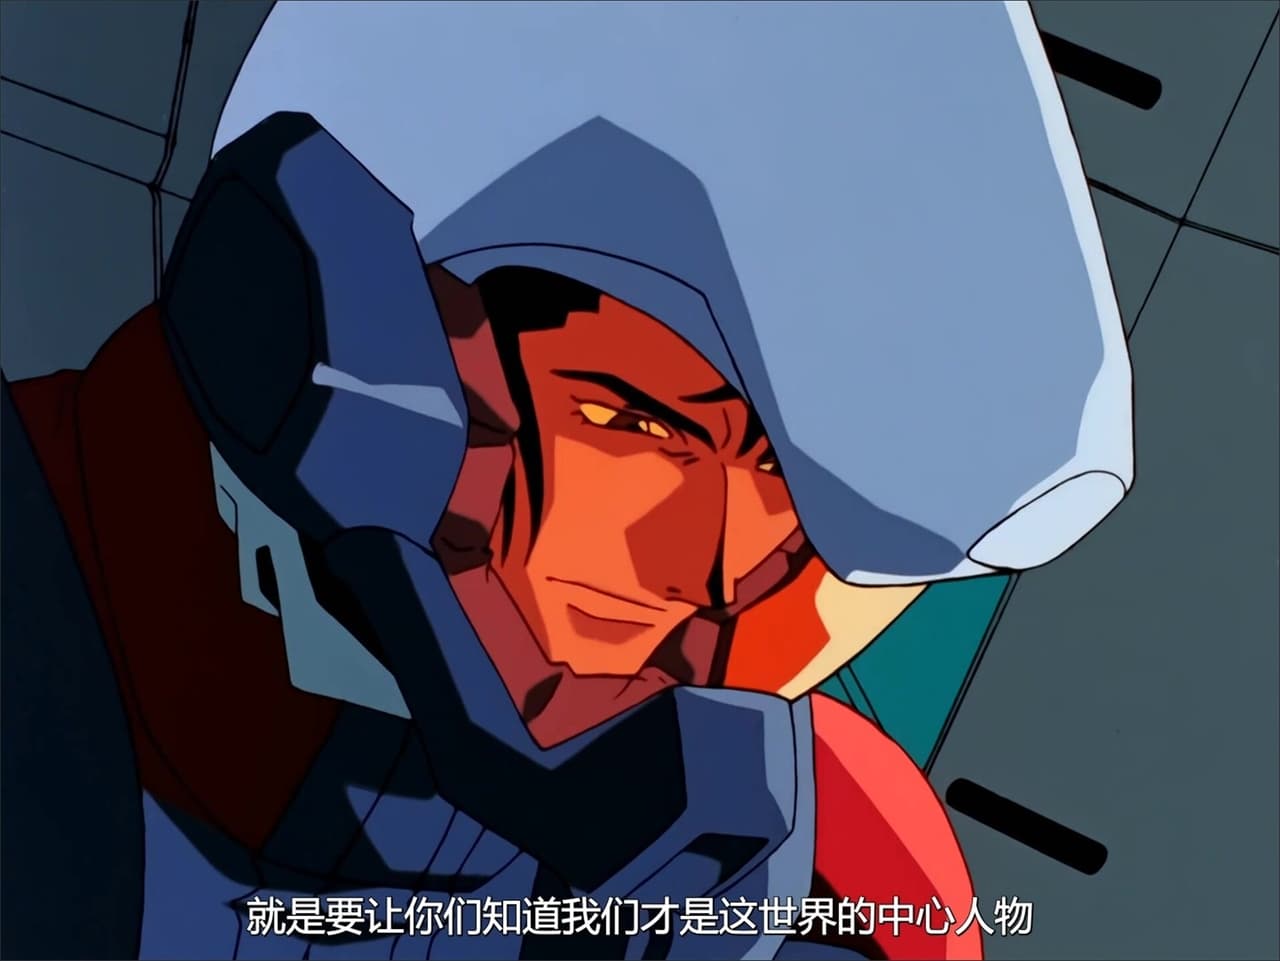 I am DOME I was once called a Newtype